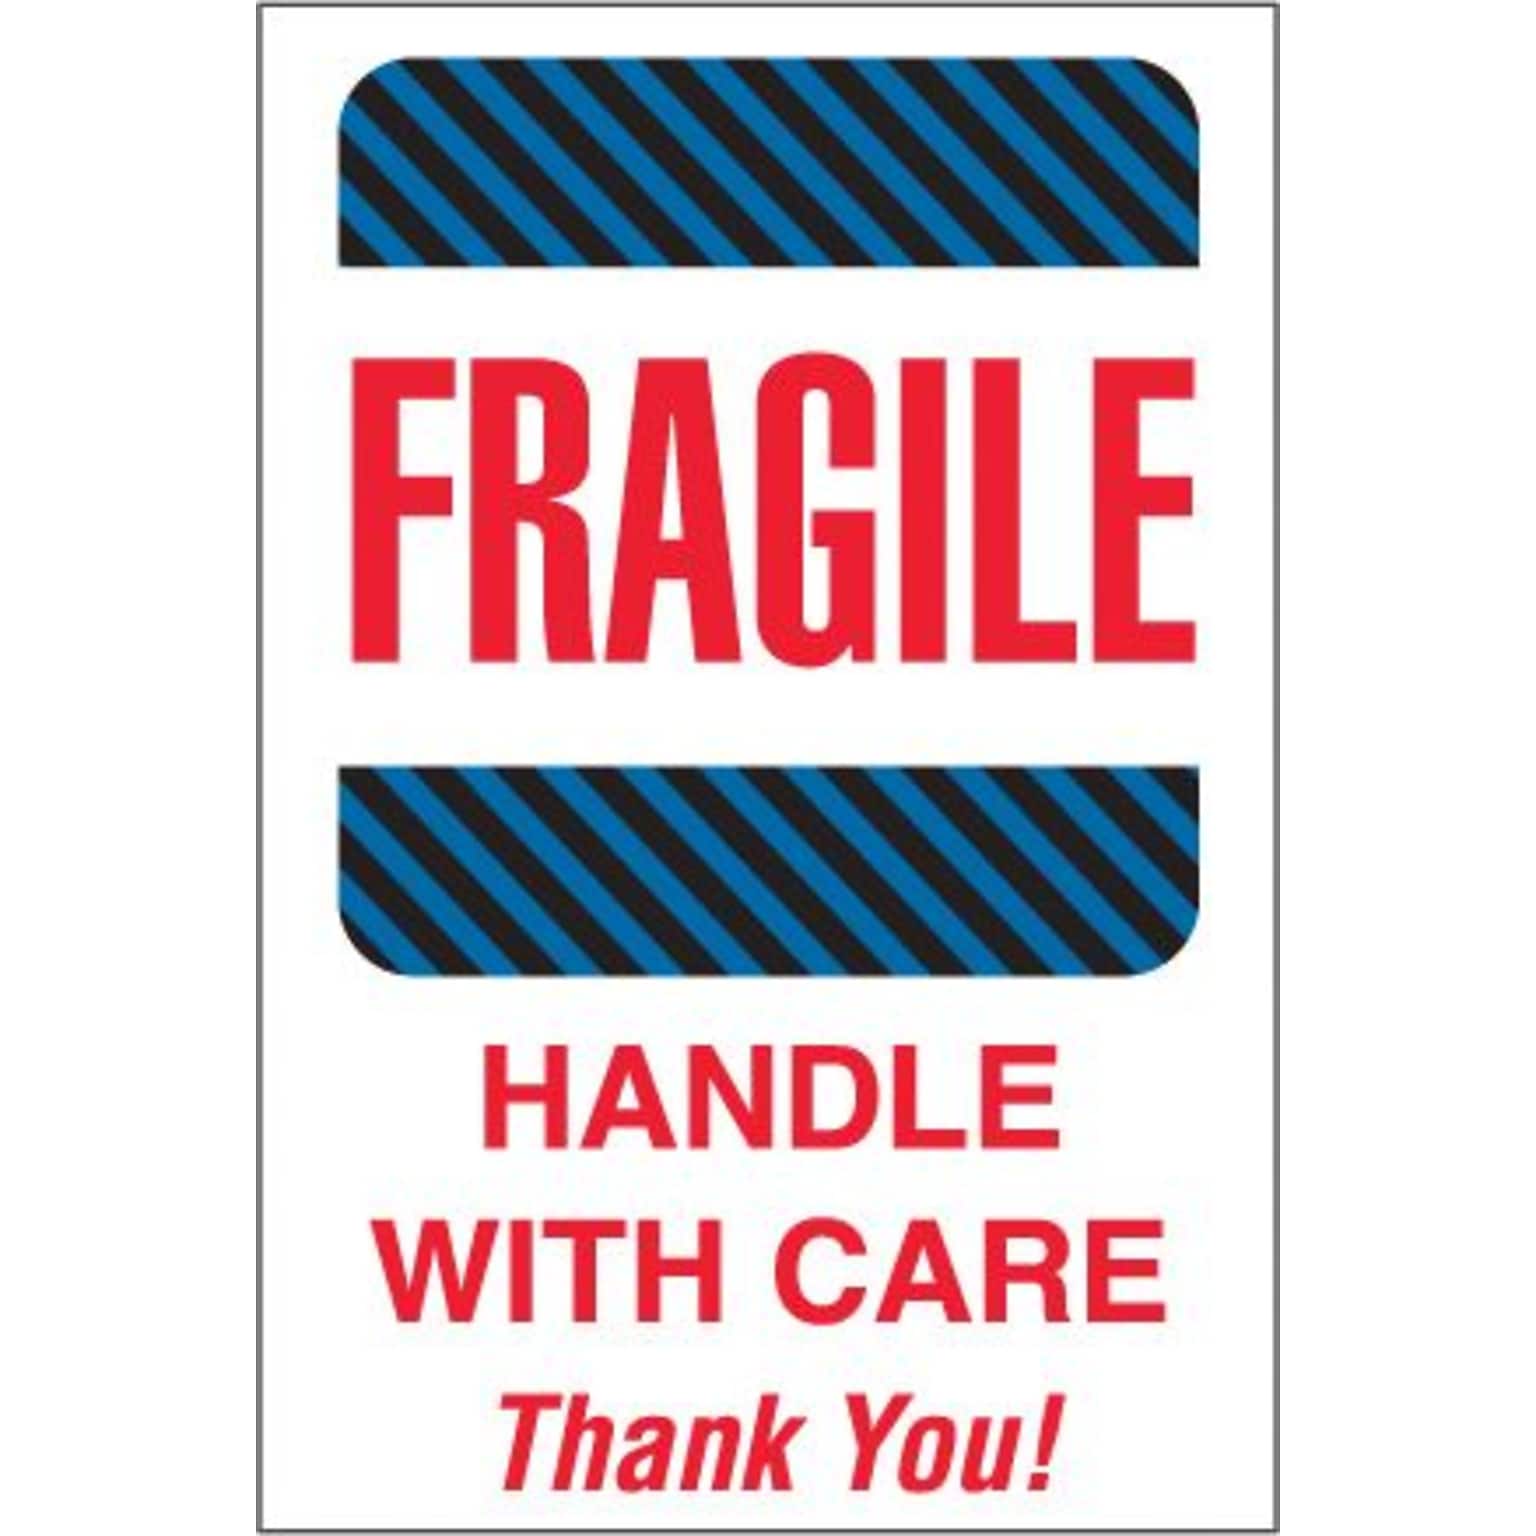 Tape Logic Fragile - Handle With Care Thank You! Shipping Label, 4 x 6, 500/Roll